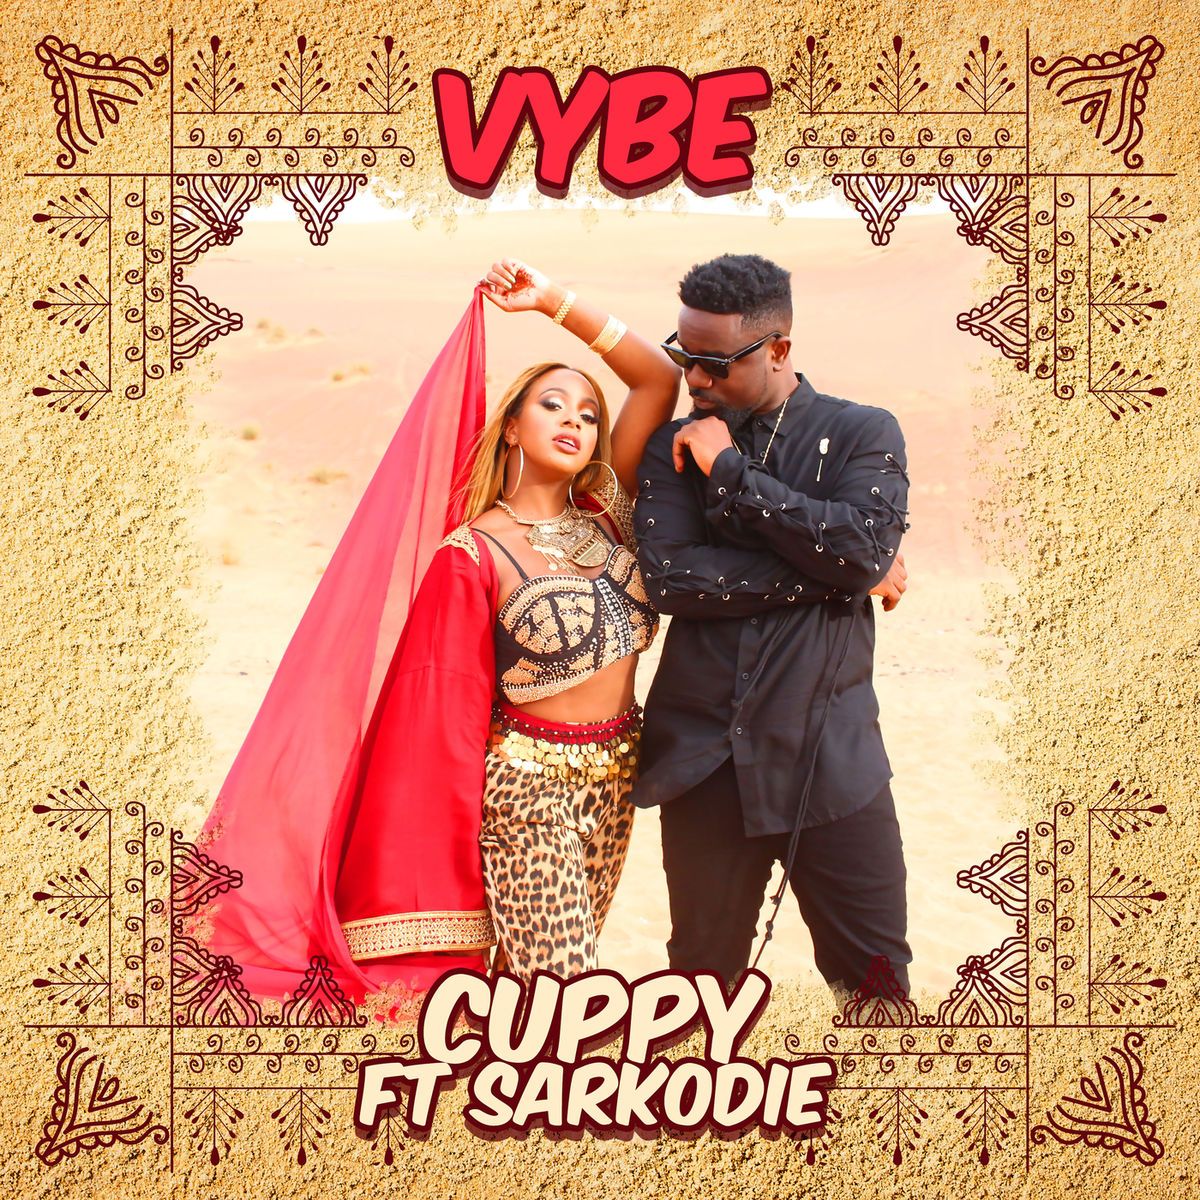 dj-cuppy-drops-music-vybe-featuring-sarkodie-just-in-time-for-easter-watch